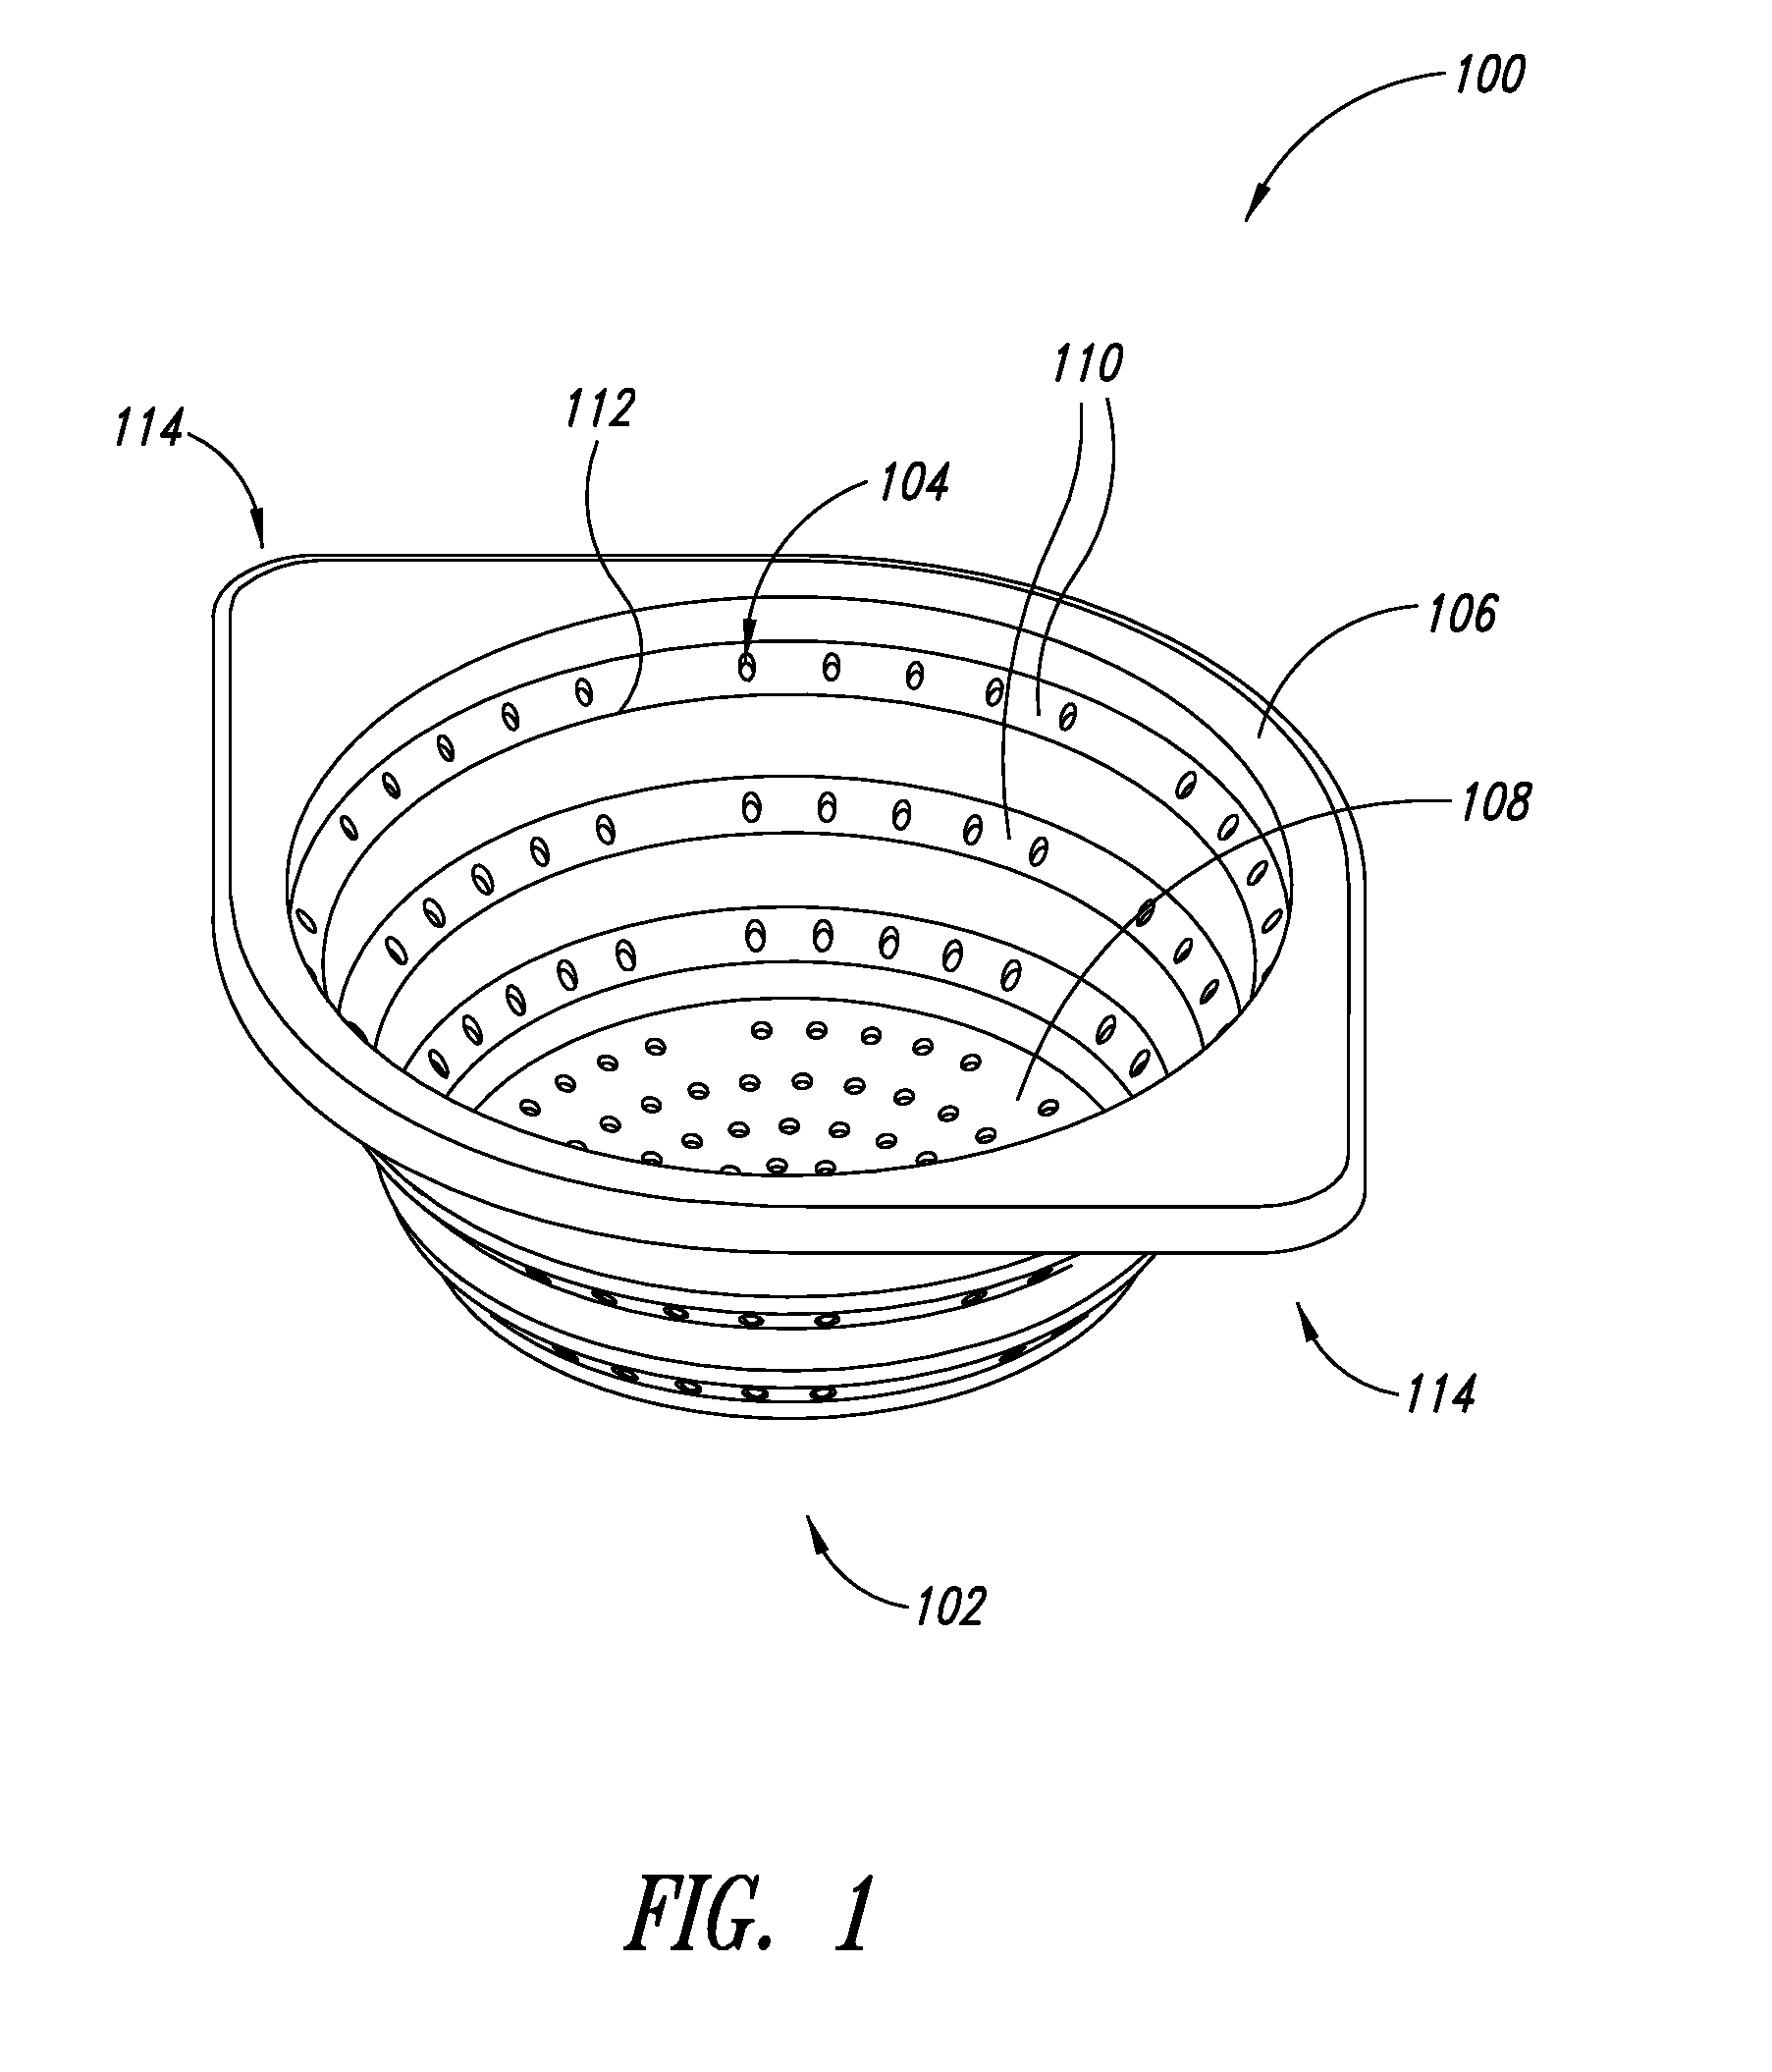 Collapsible straining device